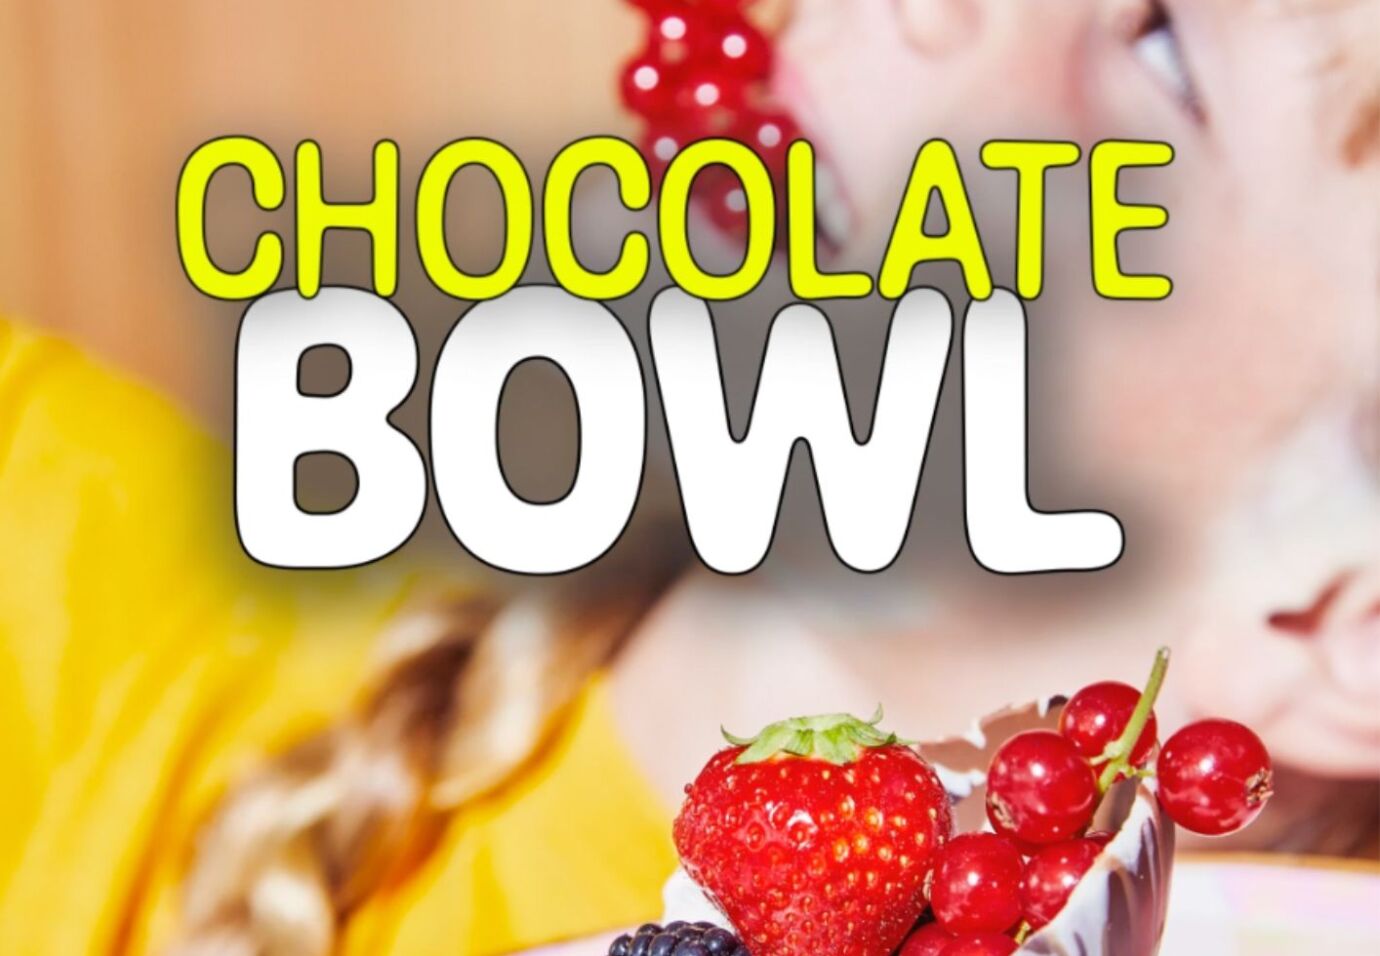 Chocolate bowl Grace Everything Kids Sofie Dumont Chef